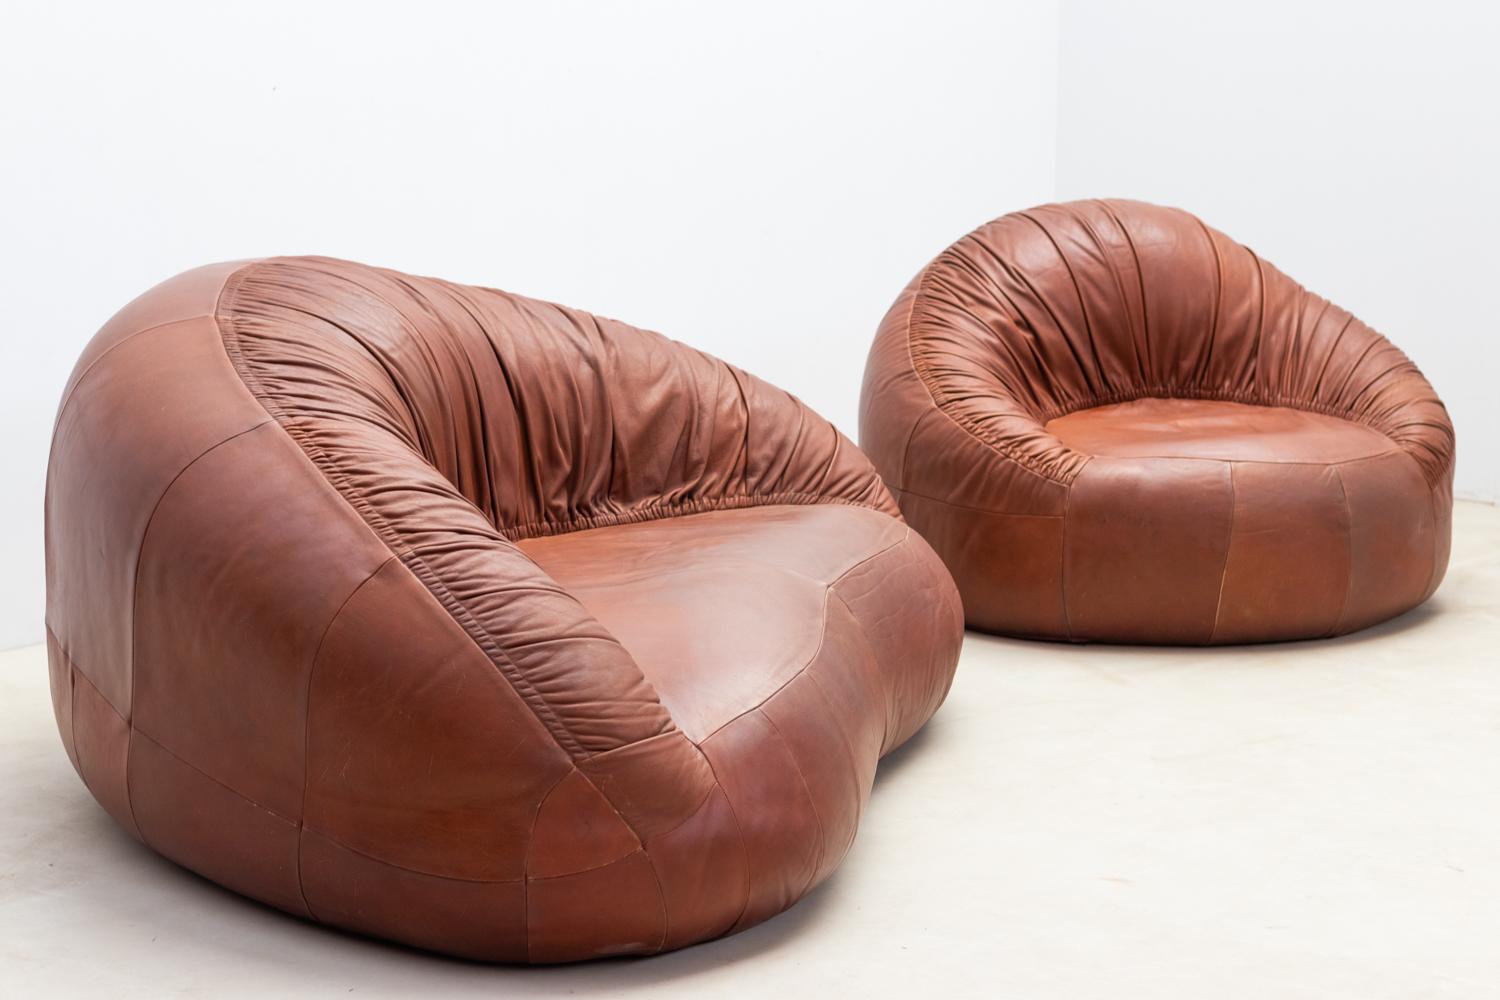 South African Pangolin Leather sofa and armchair by Egg Designs For Sale